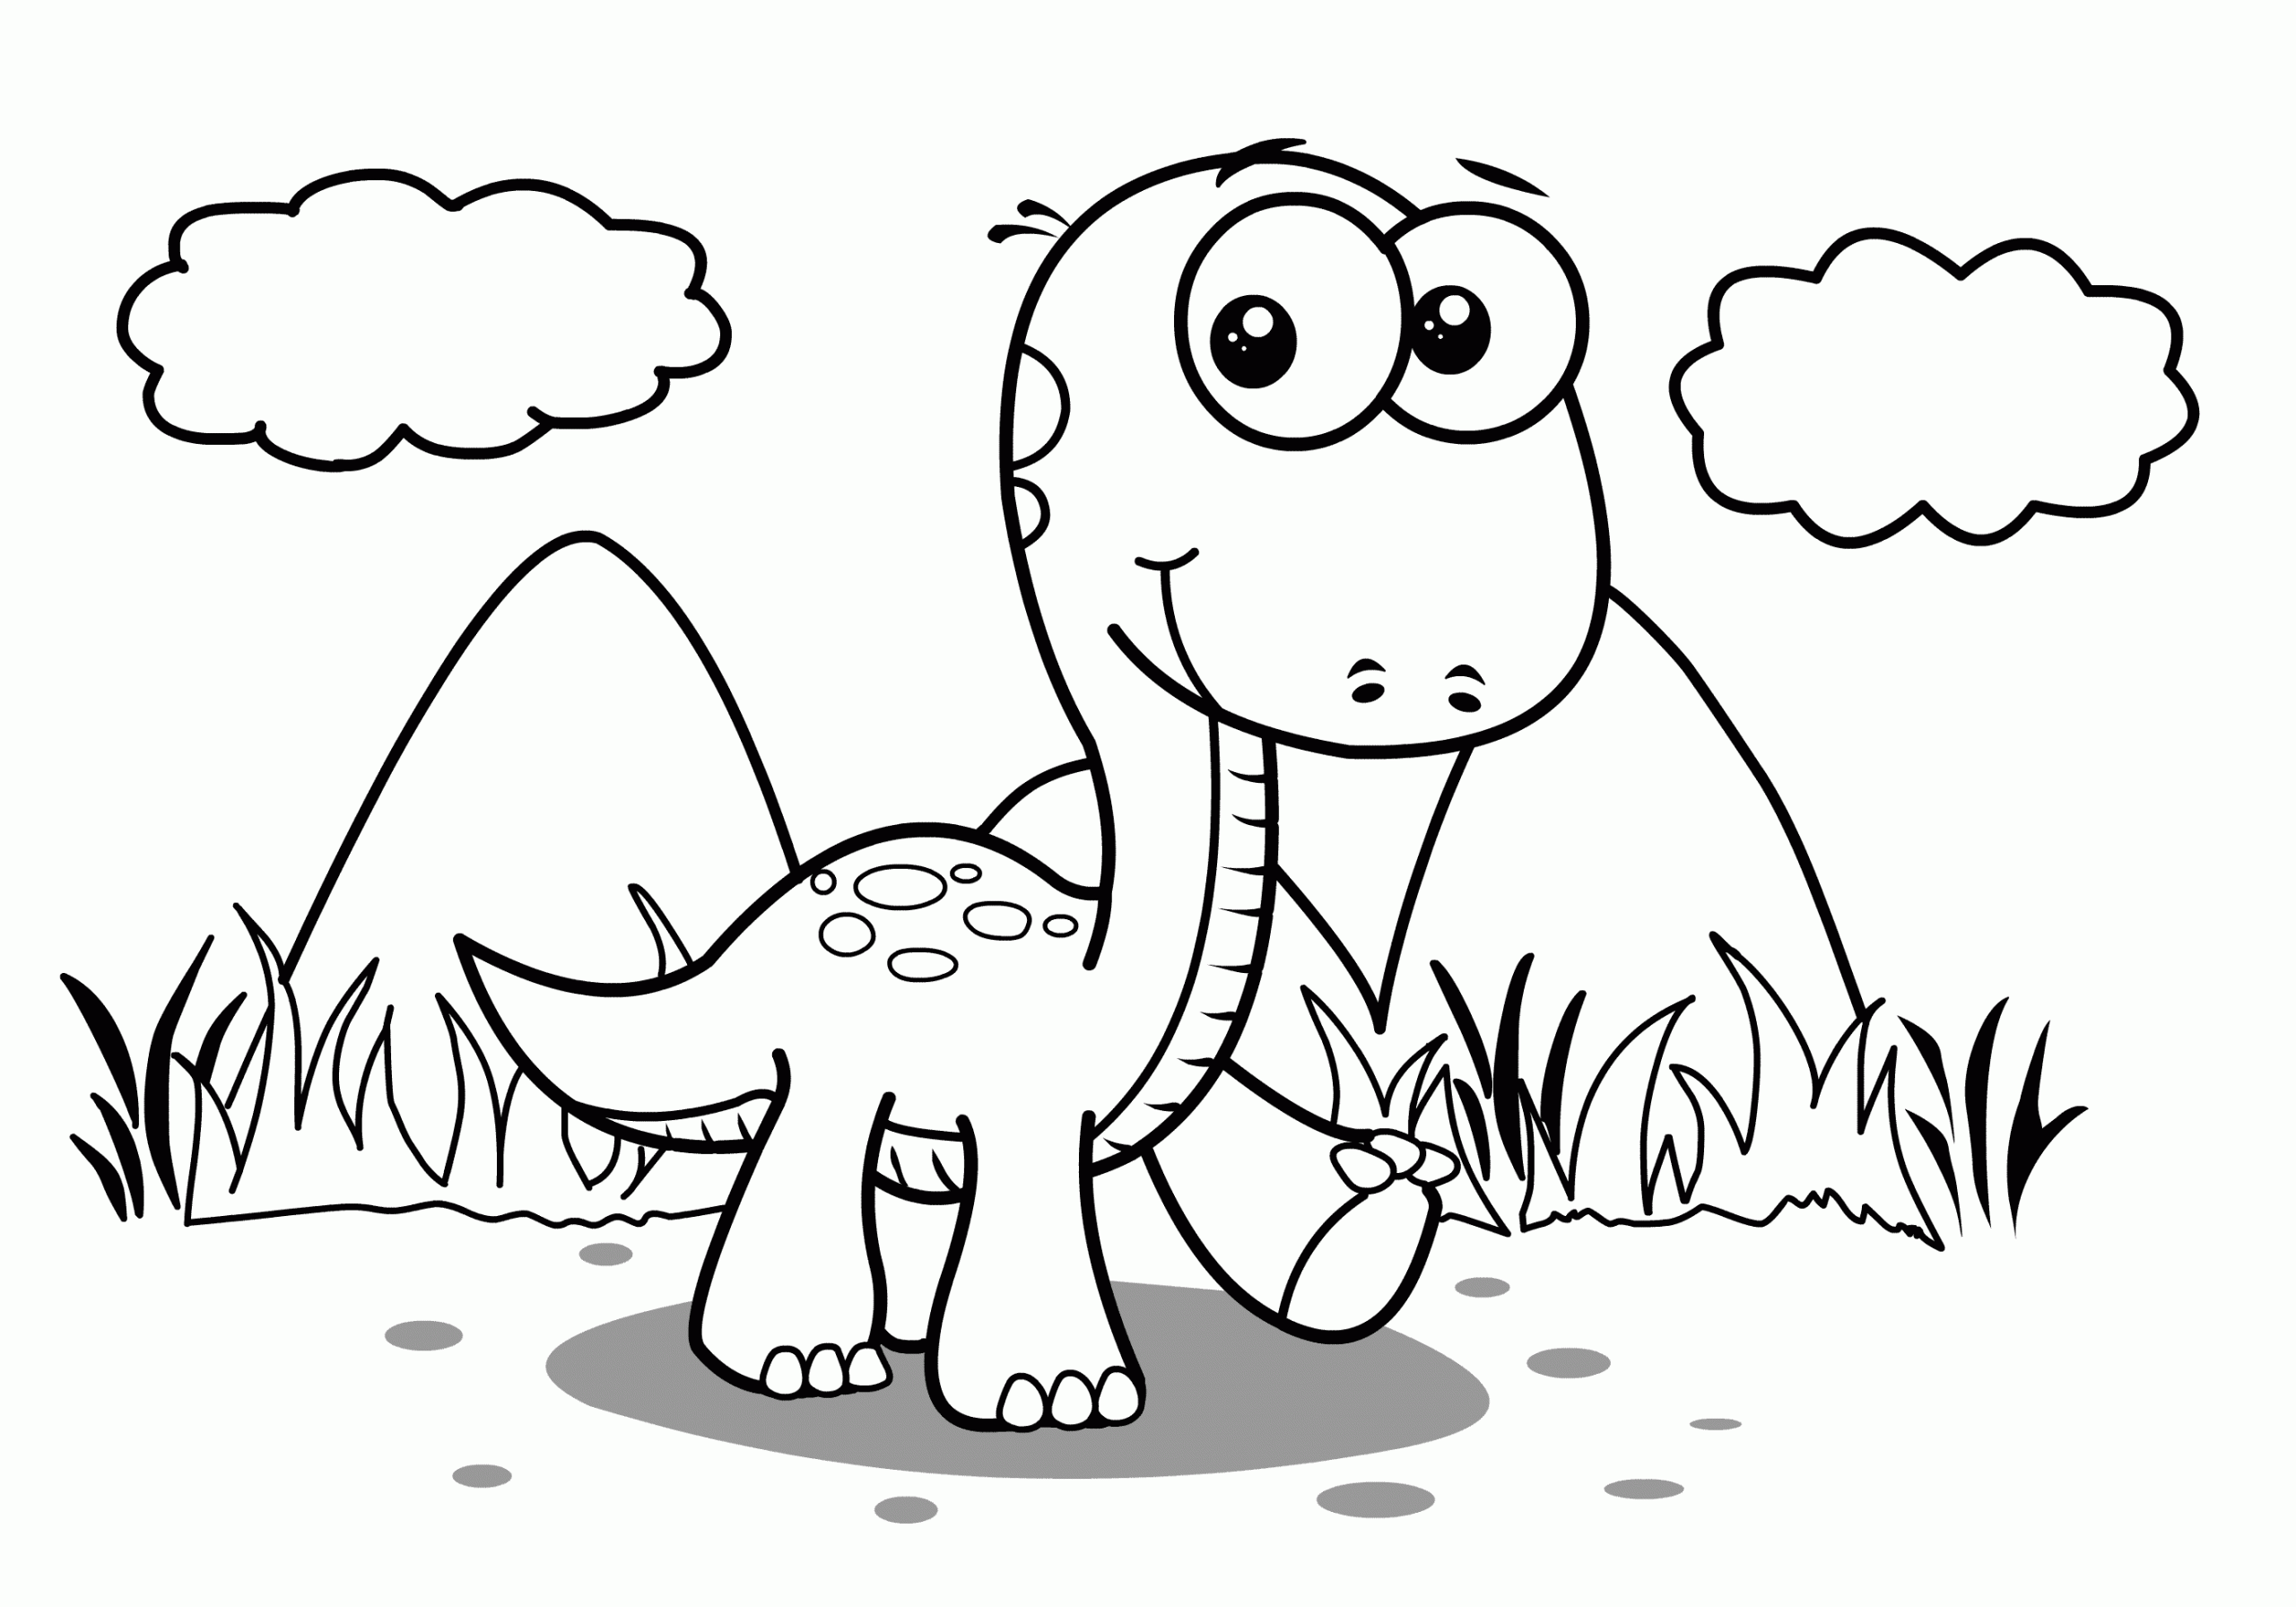 32-easy-cute-dinosaur-coloring-pages-background-colorist